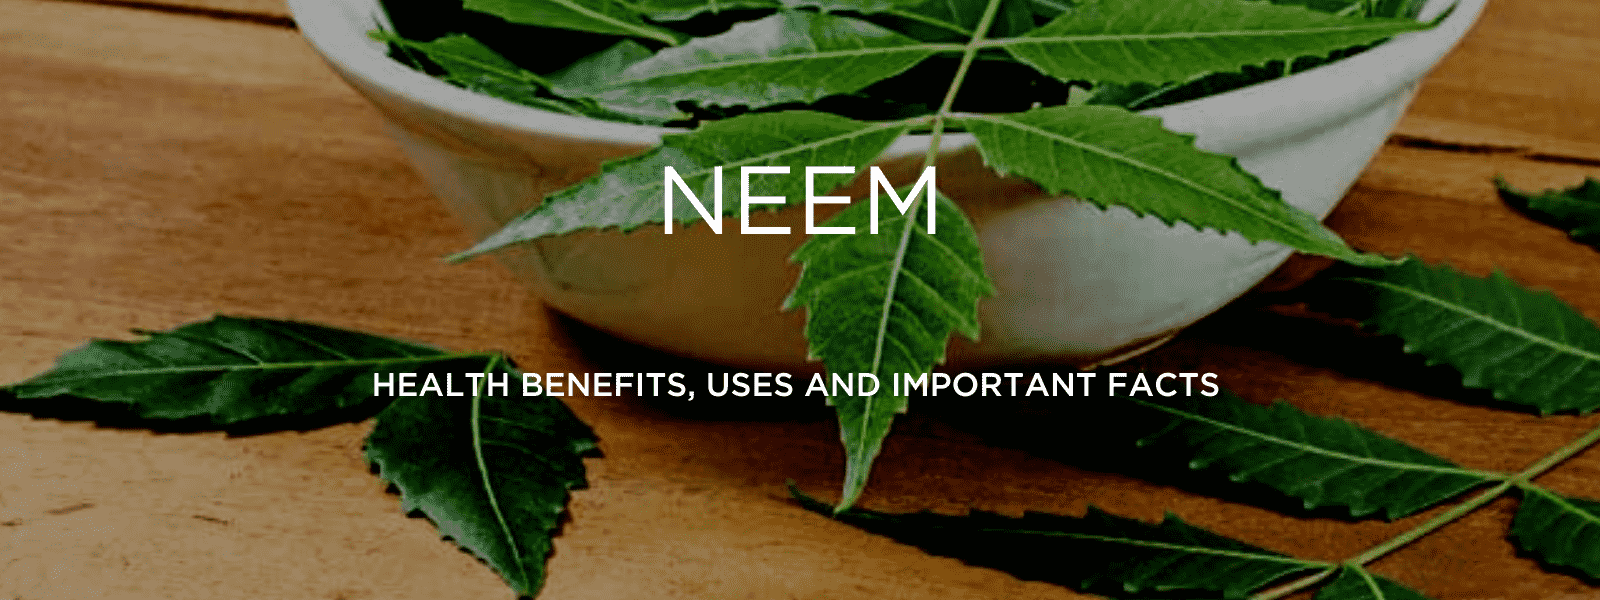 Neem - Health Benefits, Uses and Important Facts